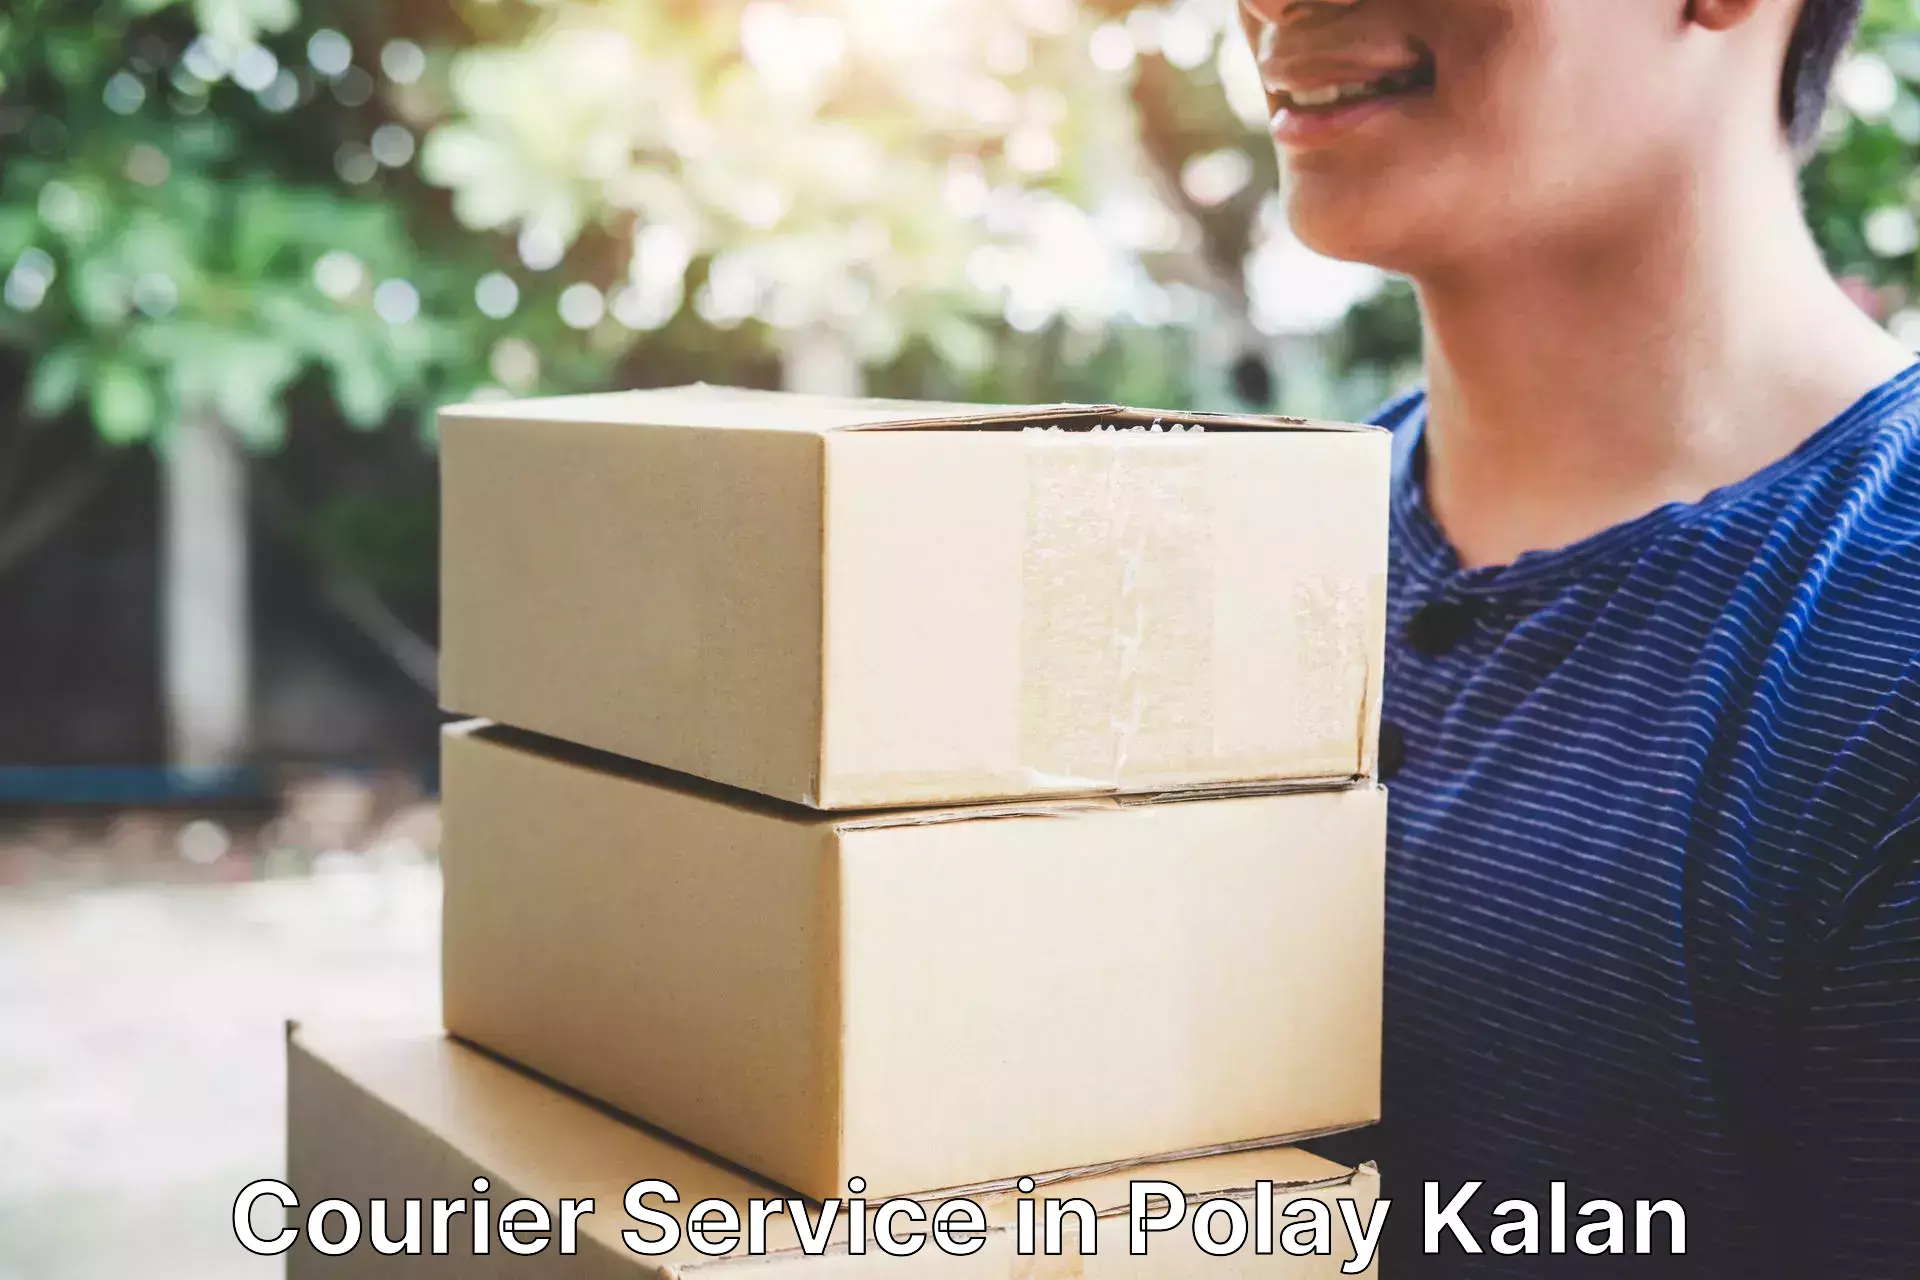 High-quality delivery services in Polay Kalan